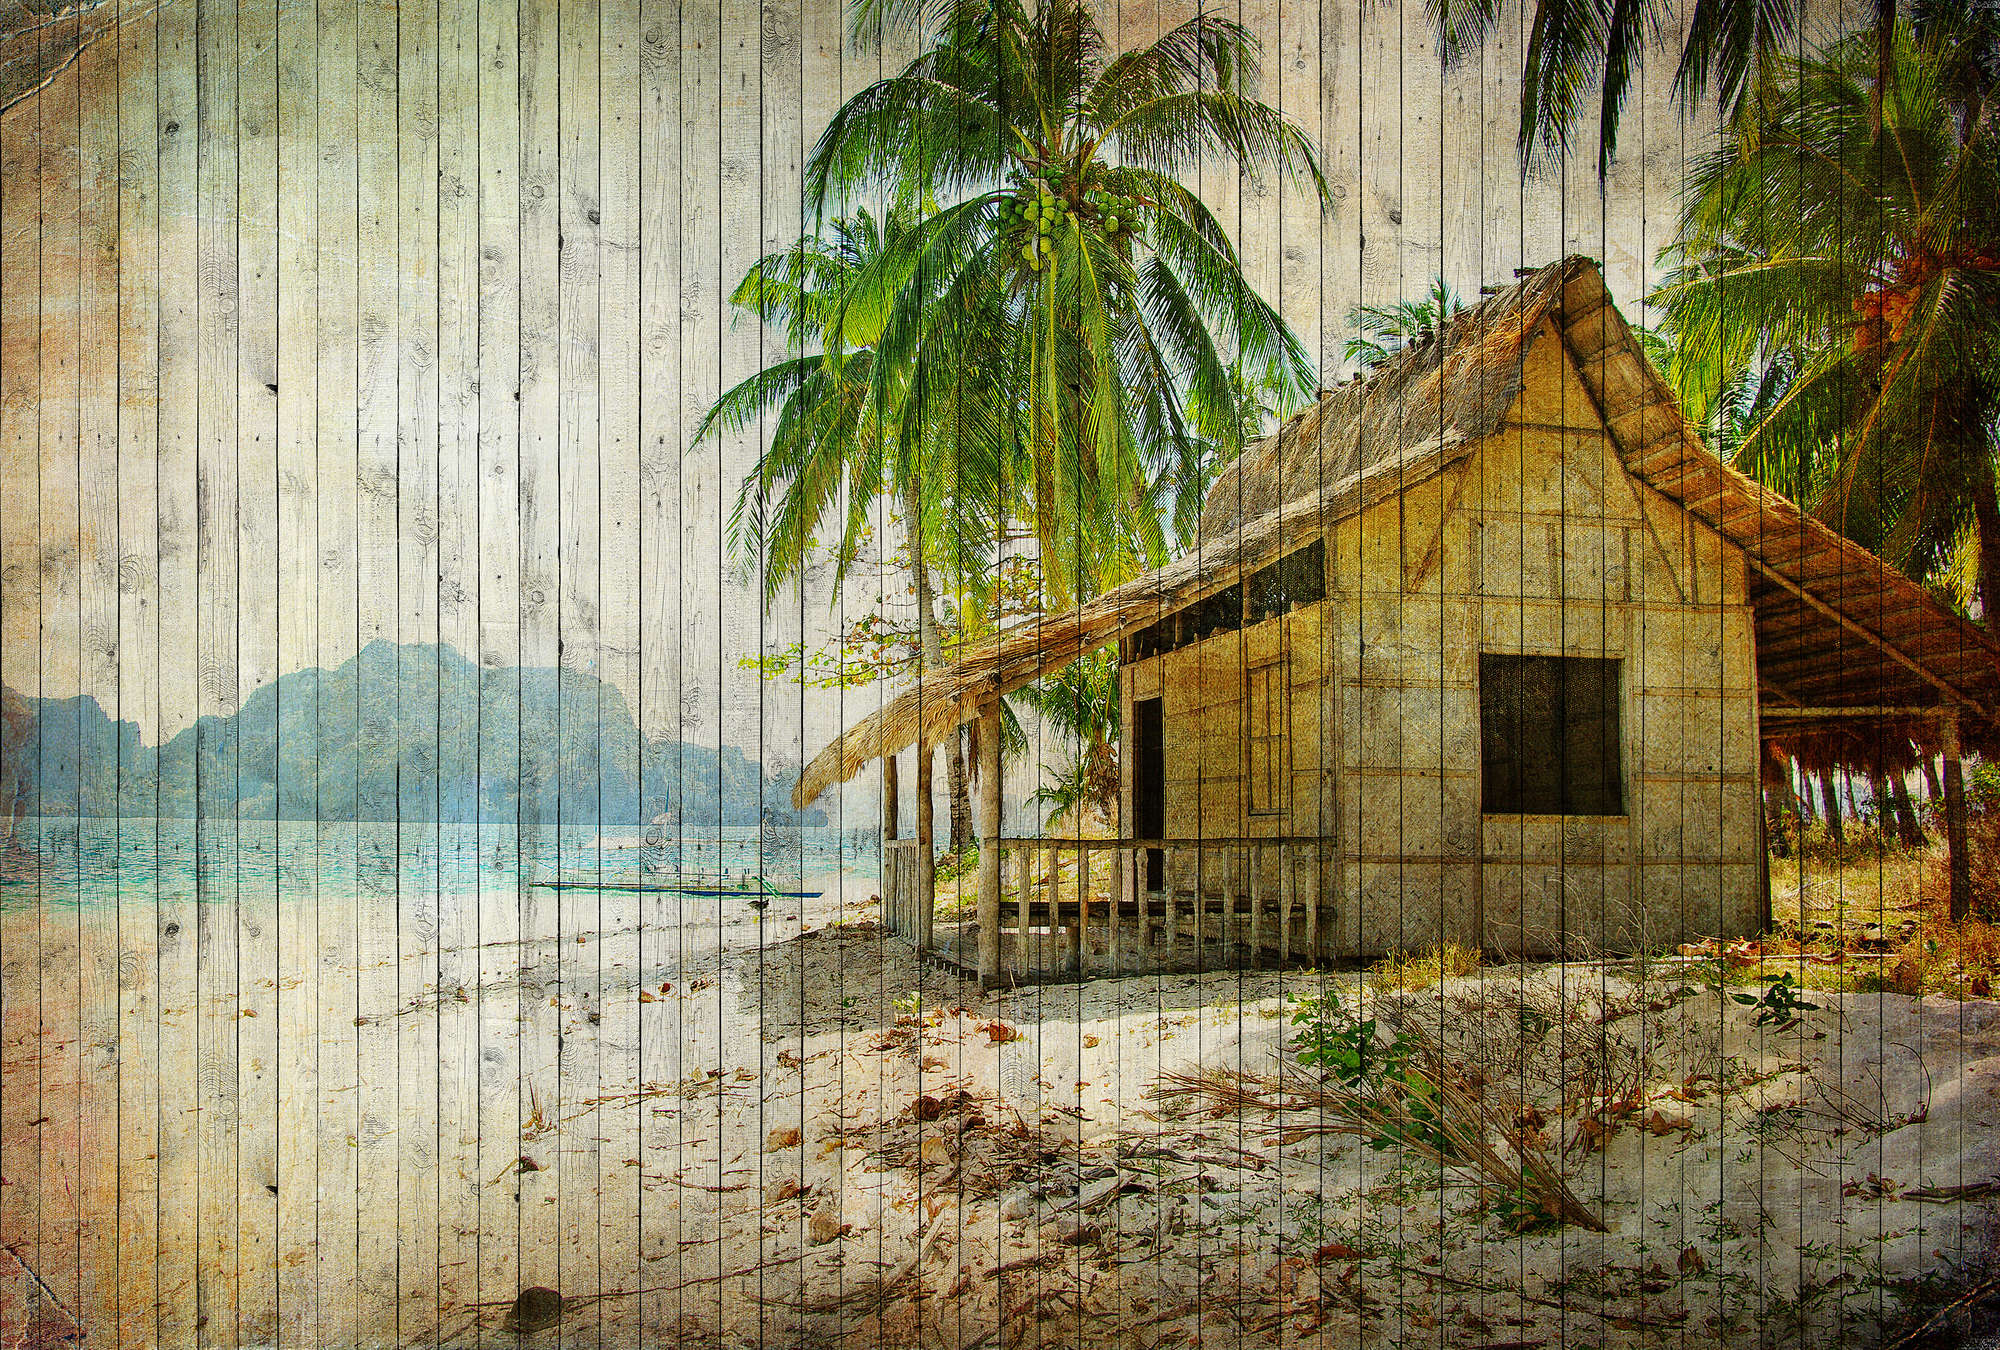             Tahiti 1 - South Seas beach wallpaper with board optics in wood panels - Beige, Blue | Textured non-woven
        